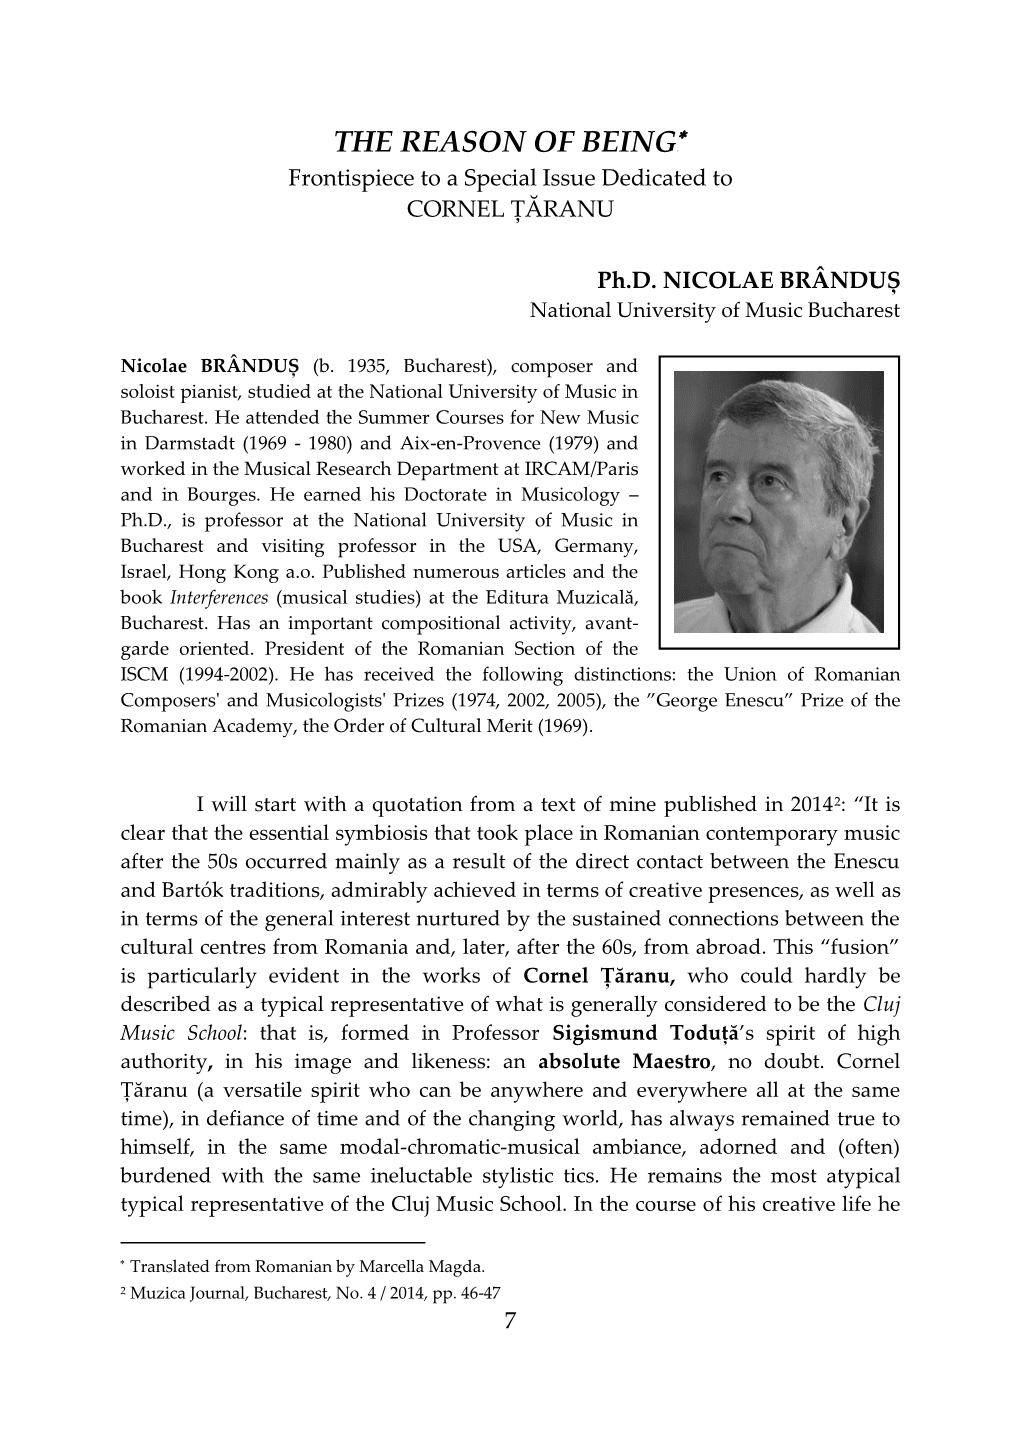 THE REASON of BEING1 Frontispiece to a Special Issue Dedicated to CORNEL ȚĂRANU